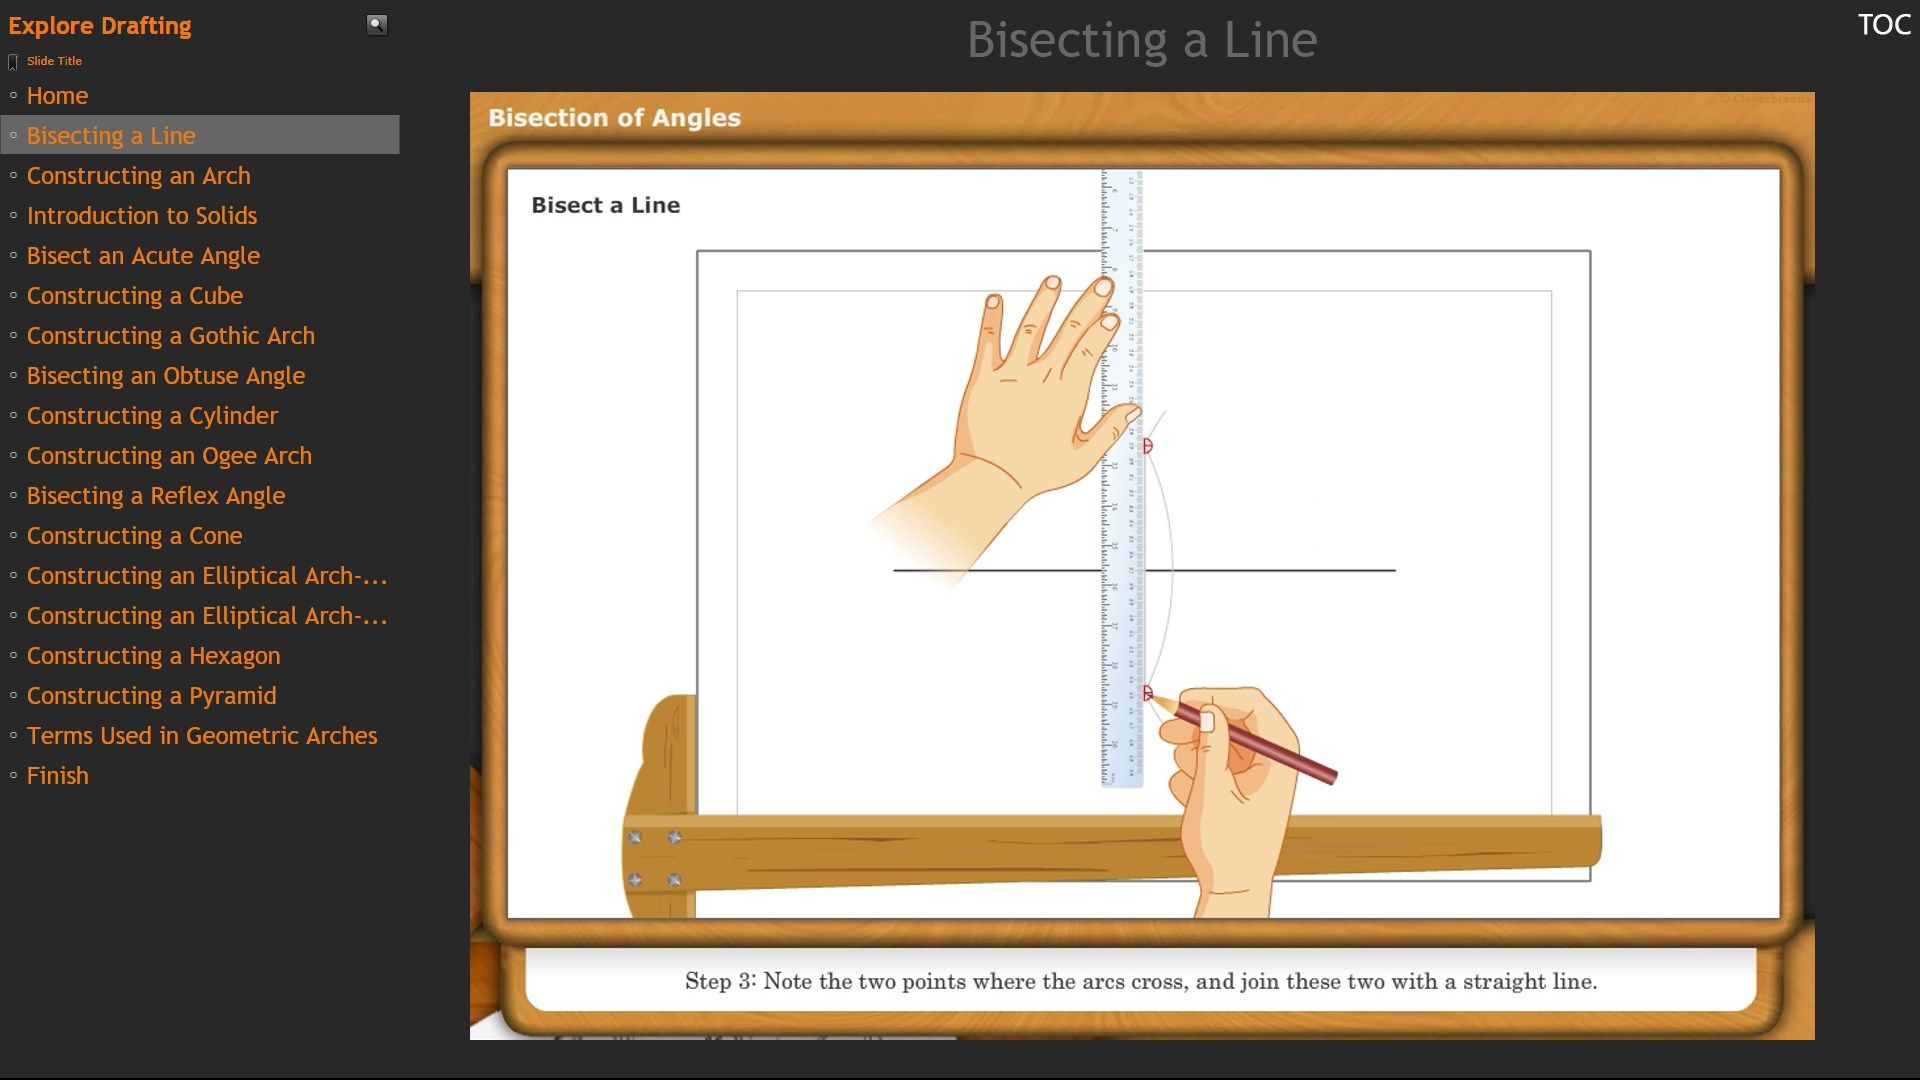 Bisecting a line